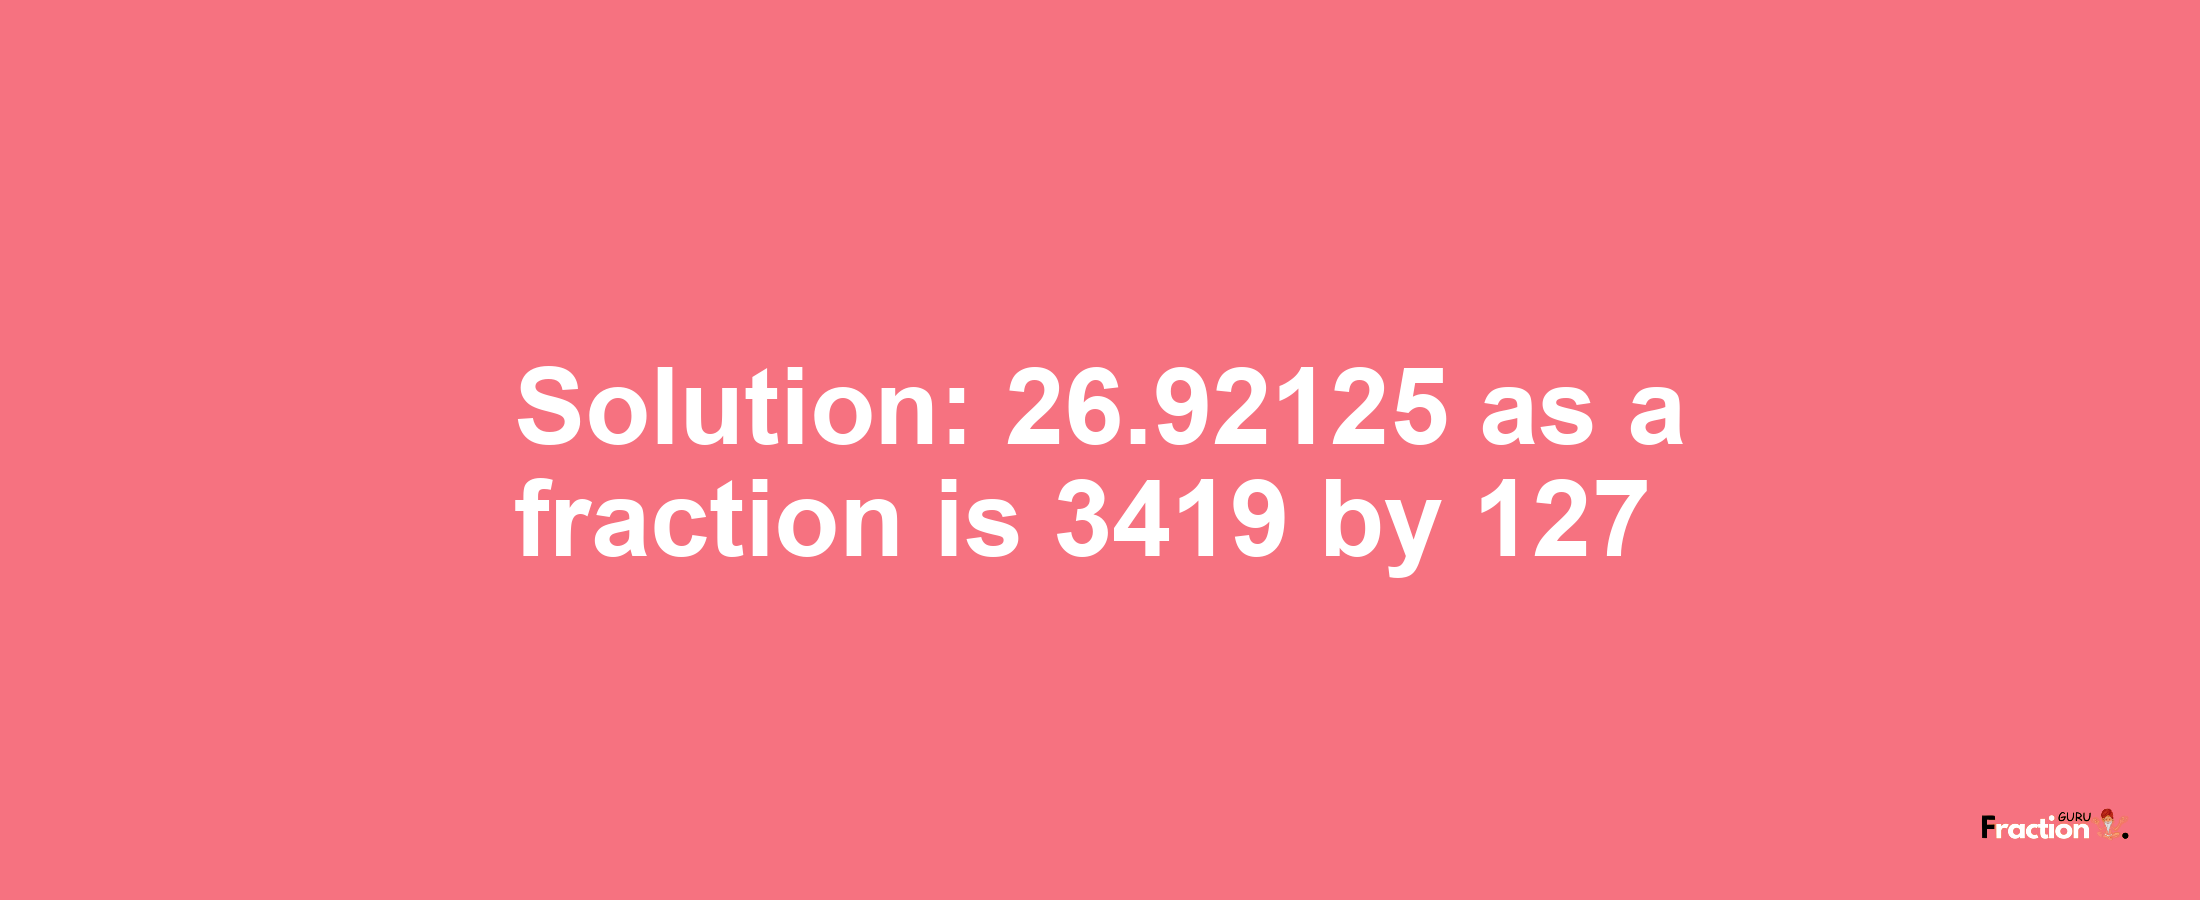 Solution:26.92125 as a fraction is 3419/127